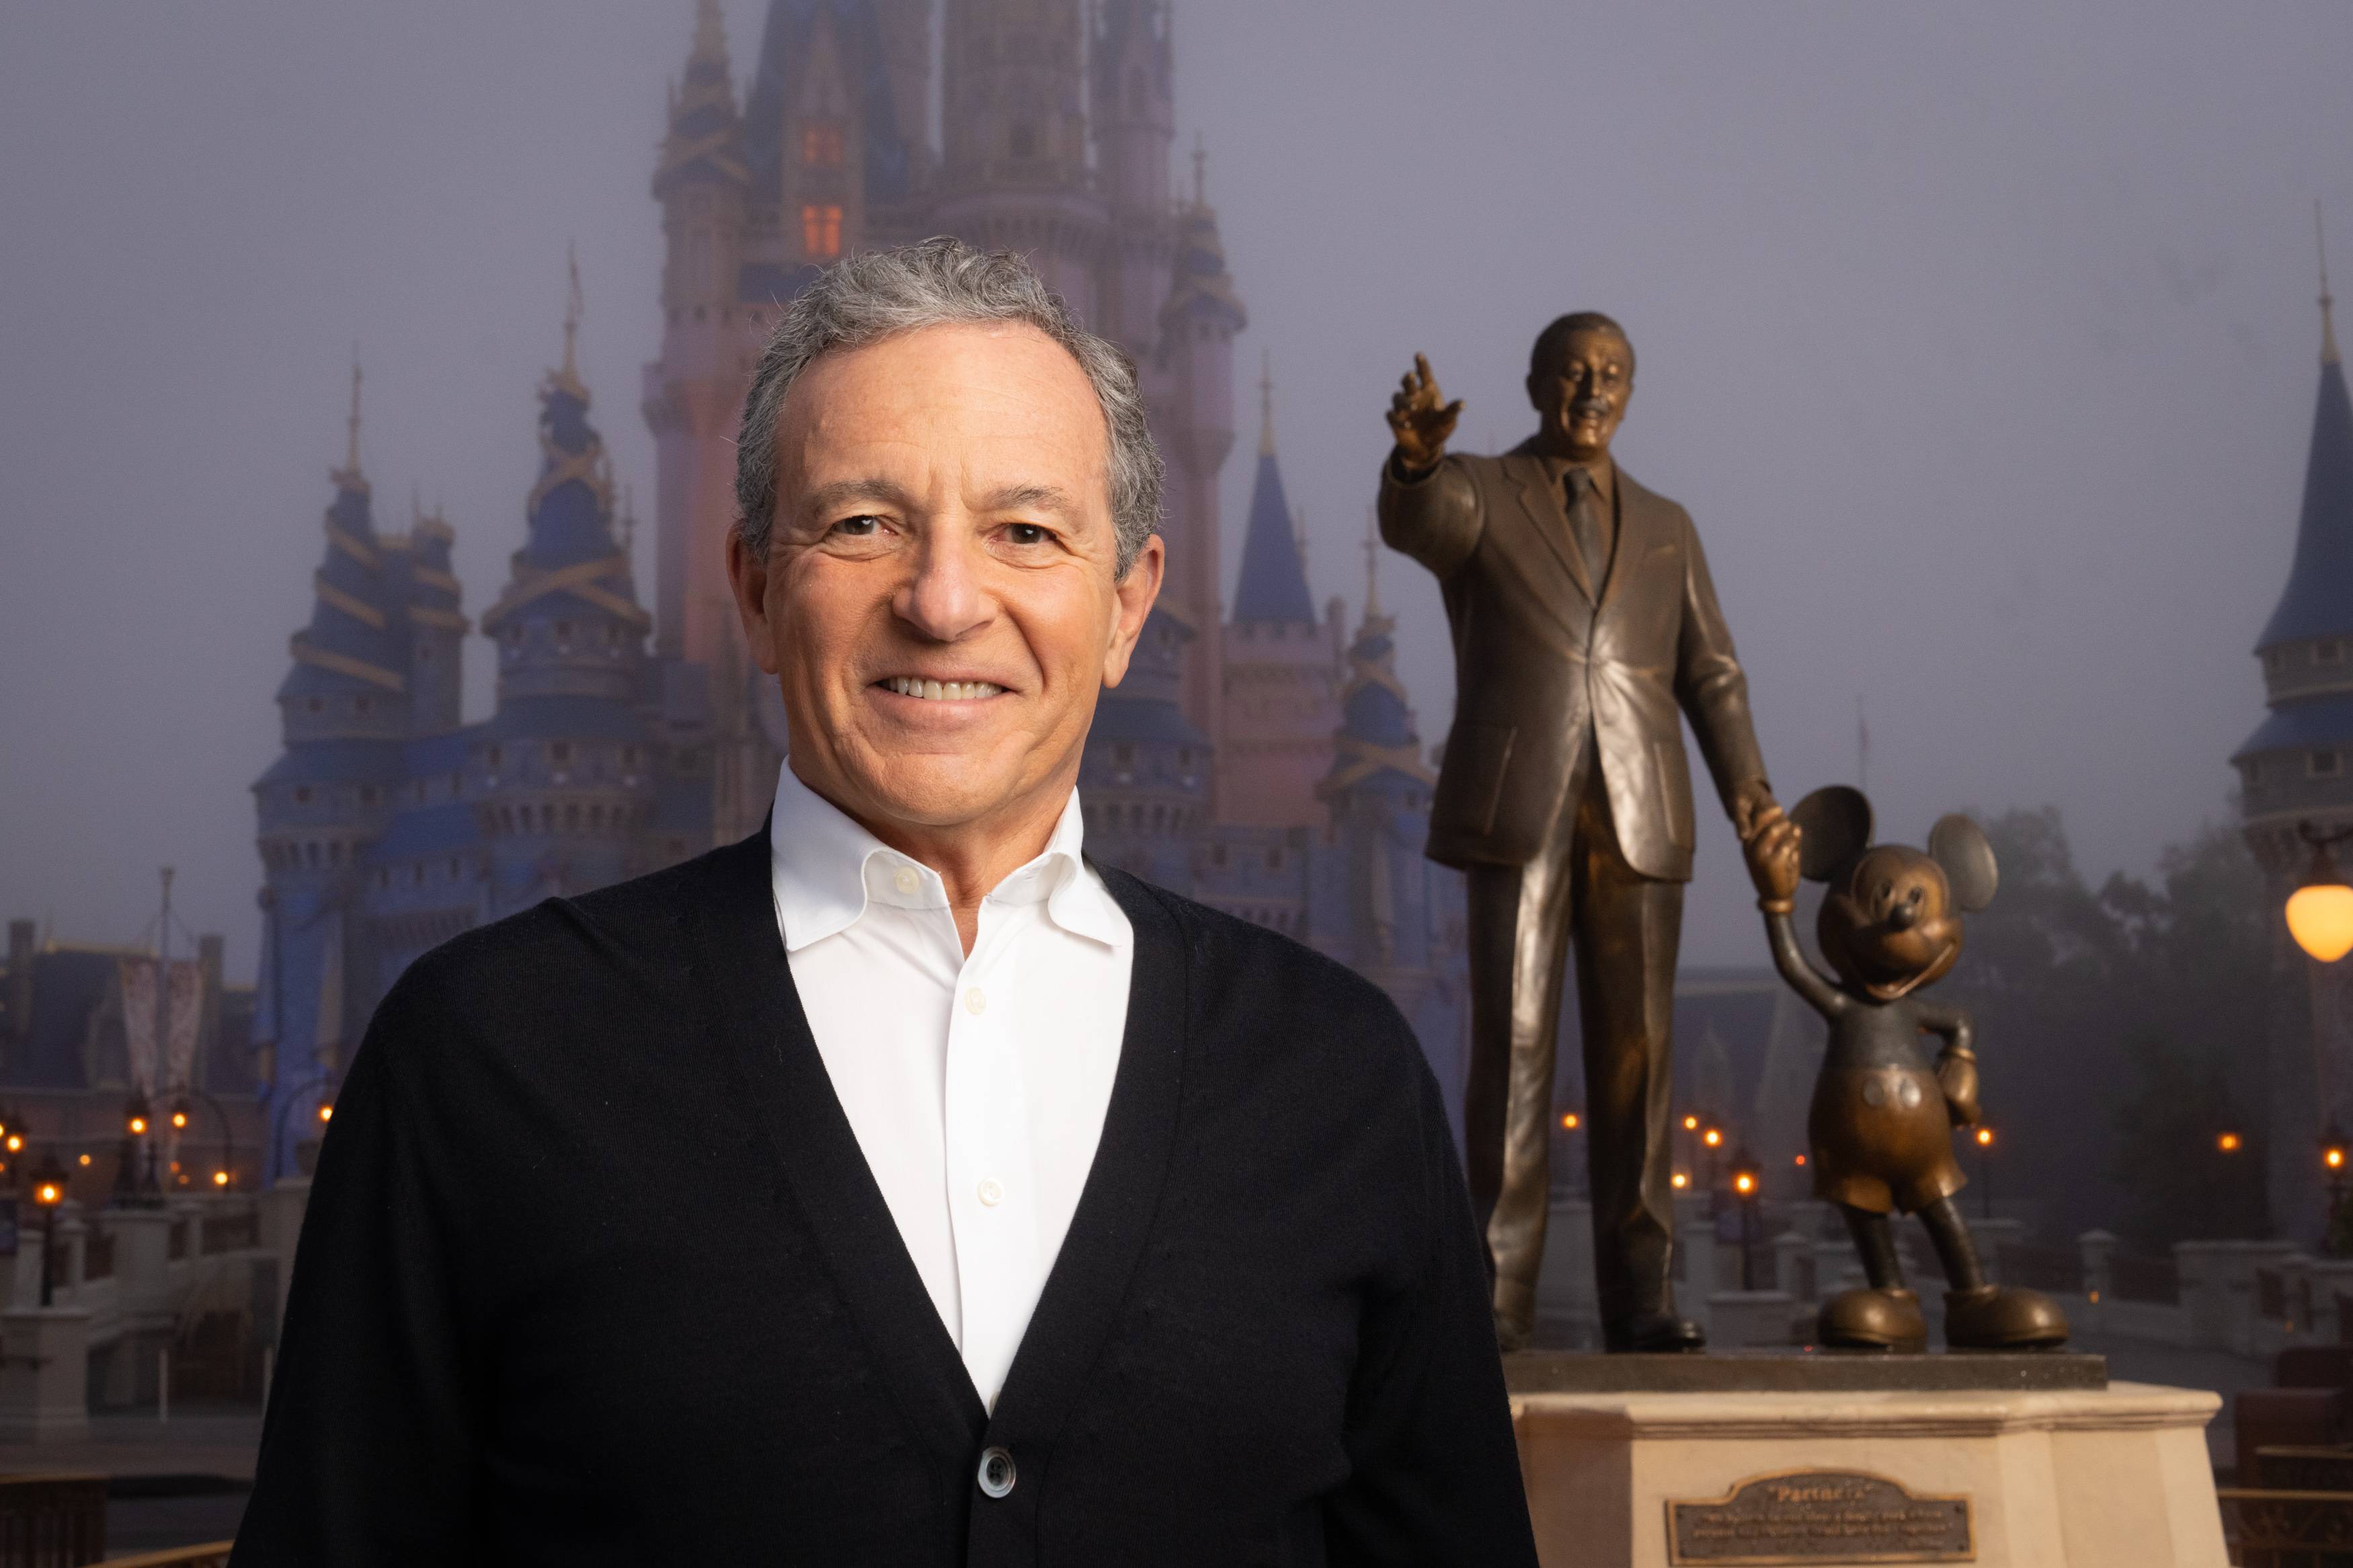 Ron DeSantis shunned Bob Iger's attempts at opening talks amid Disney's ongoing legal battle with the Florida Governor